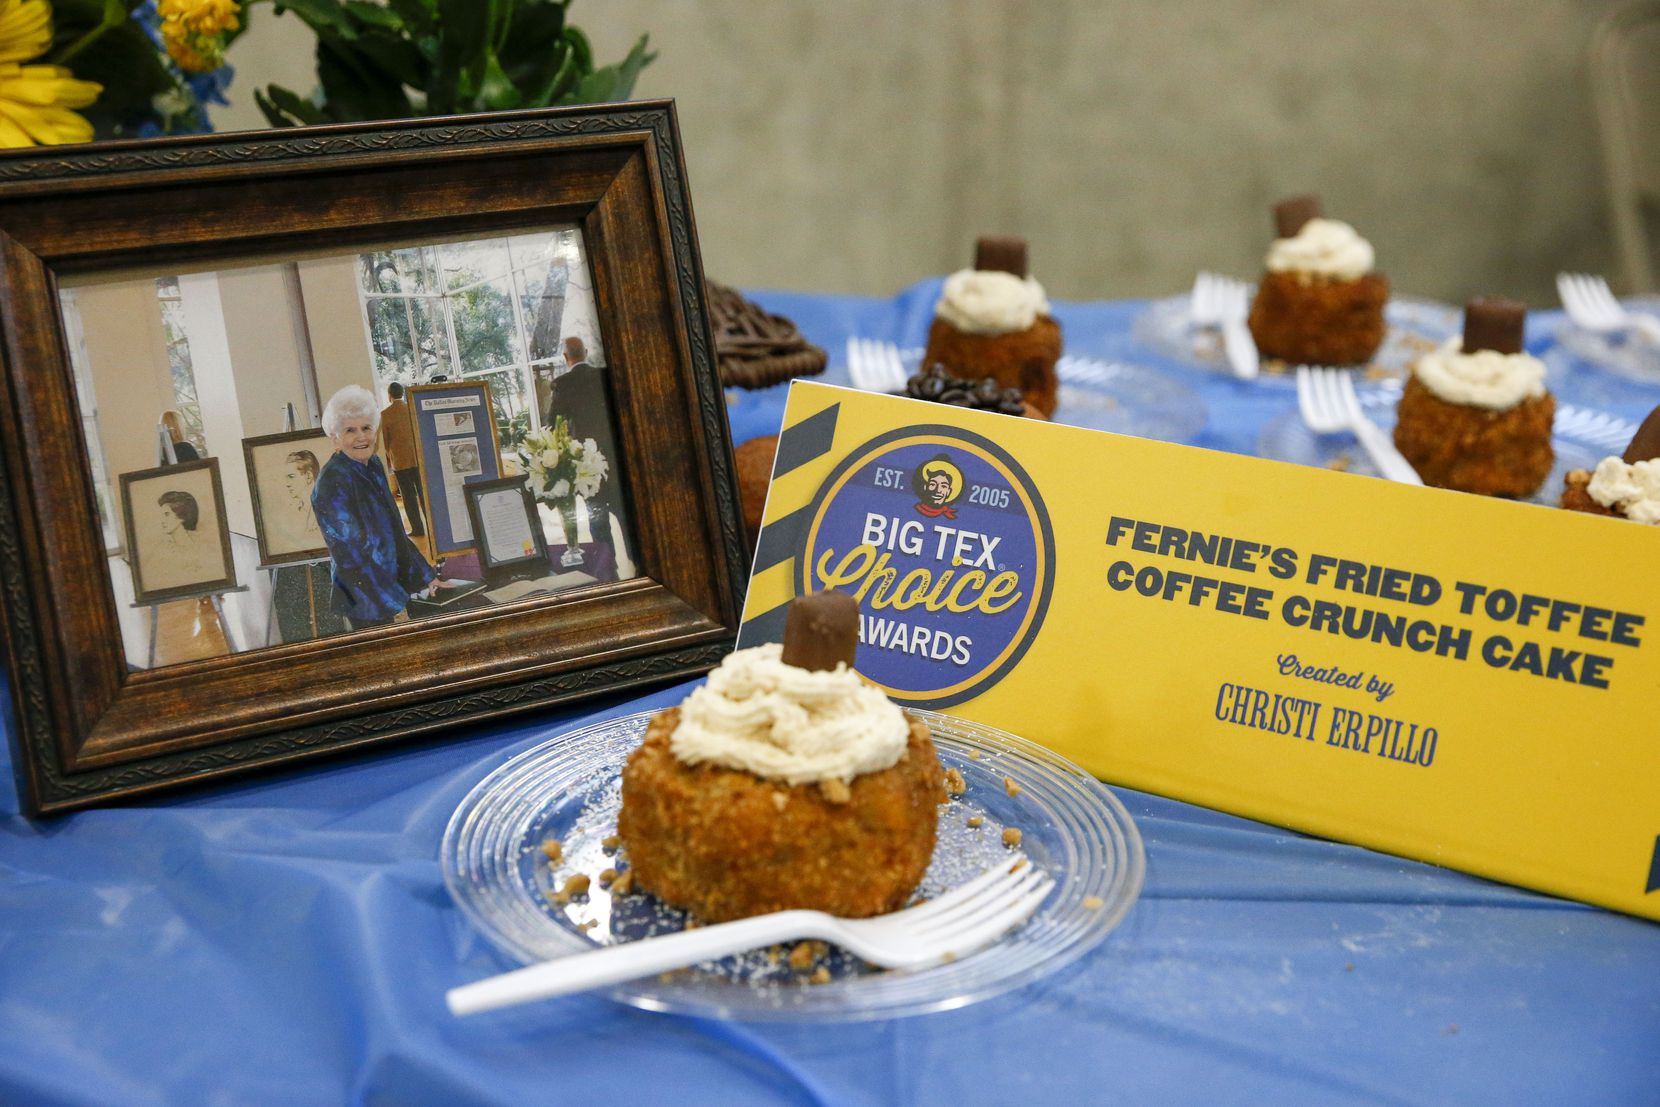 A picture of Wanda "Fernie" Winter rests on the table of her daughter Christi Erpillo’s entry during the unveiling of the Big Tex Choice Awards finalists at the Briscoe Carpenter Livestock Center at Fair Park on Wednesday, Aug. 11, 2021, in Dallas.